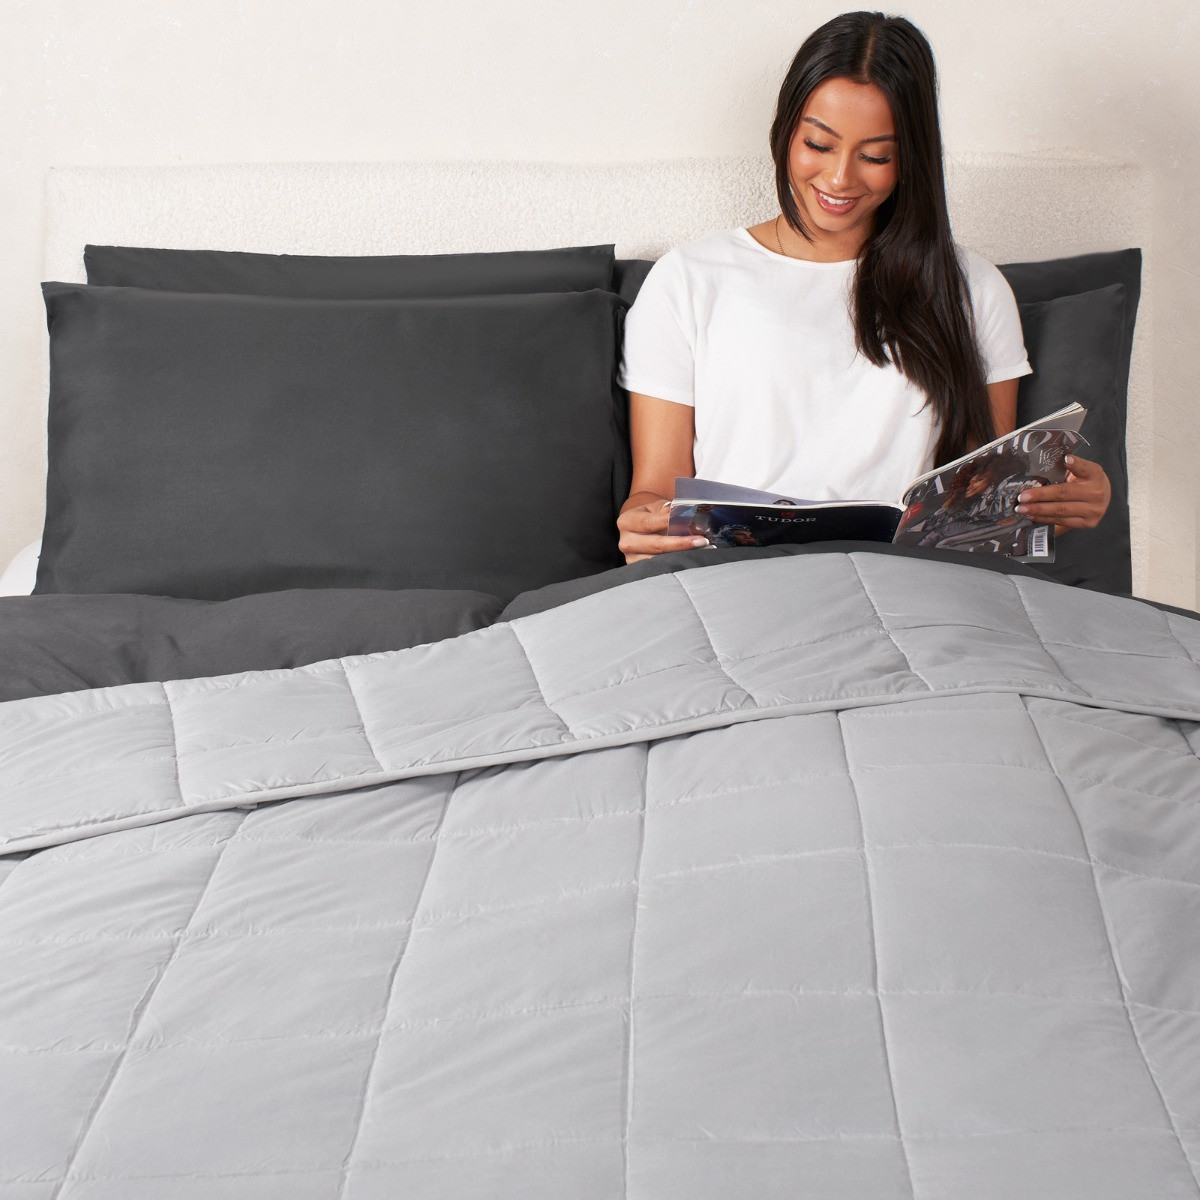 Brentfords Weighted Blanket Quilted Silver Grey, 125 x 180 cm - 6kg>